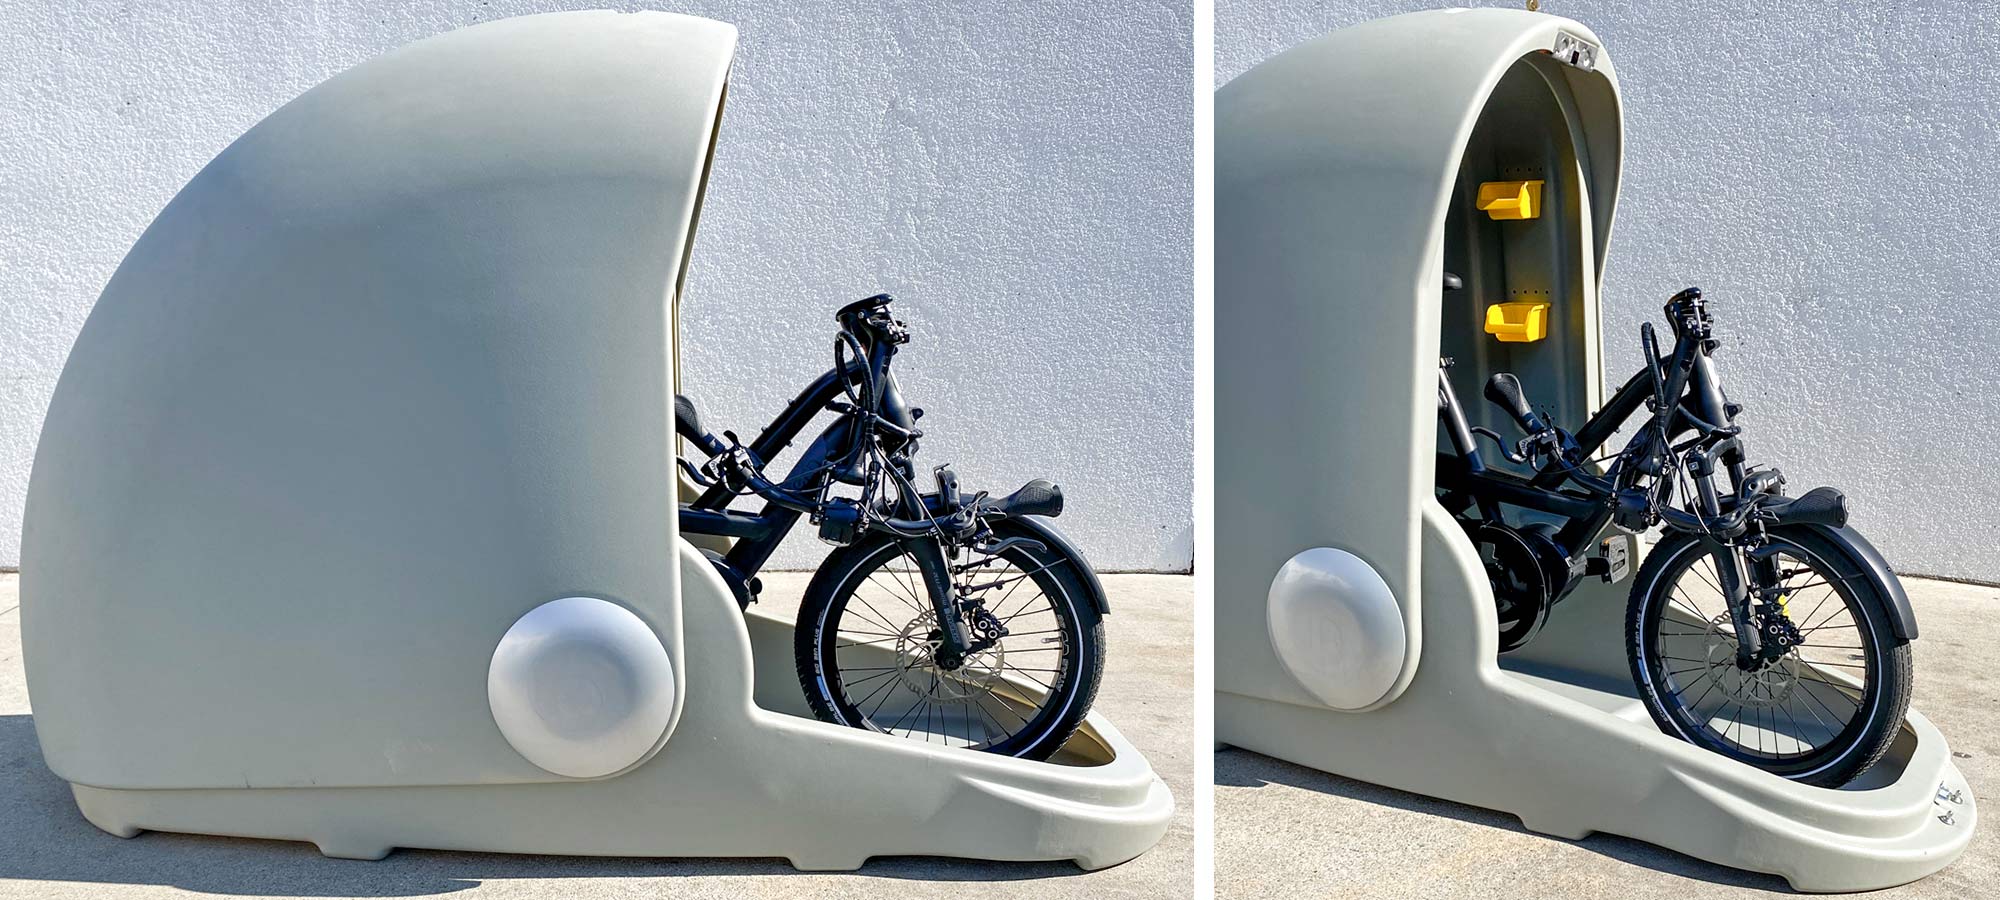 Alpen Bike Capsule offers protected, secure parking for urban commuters